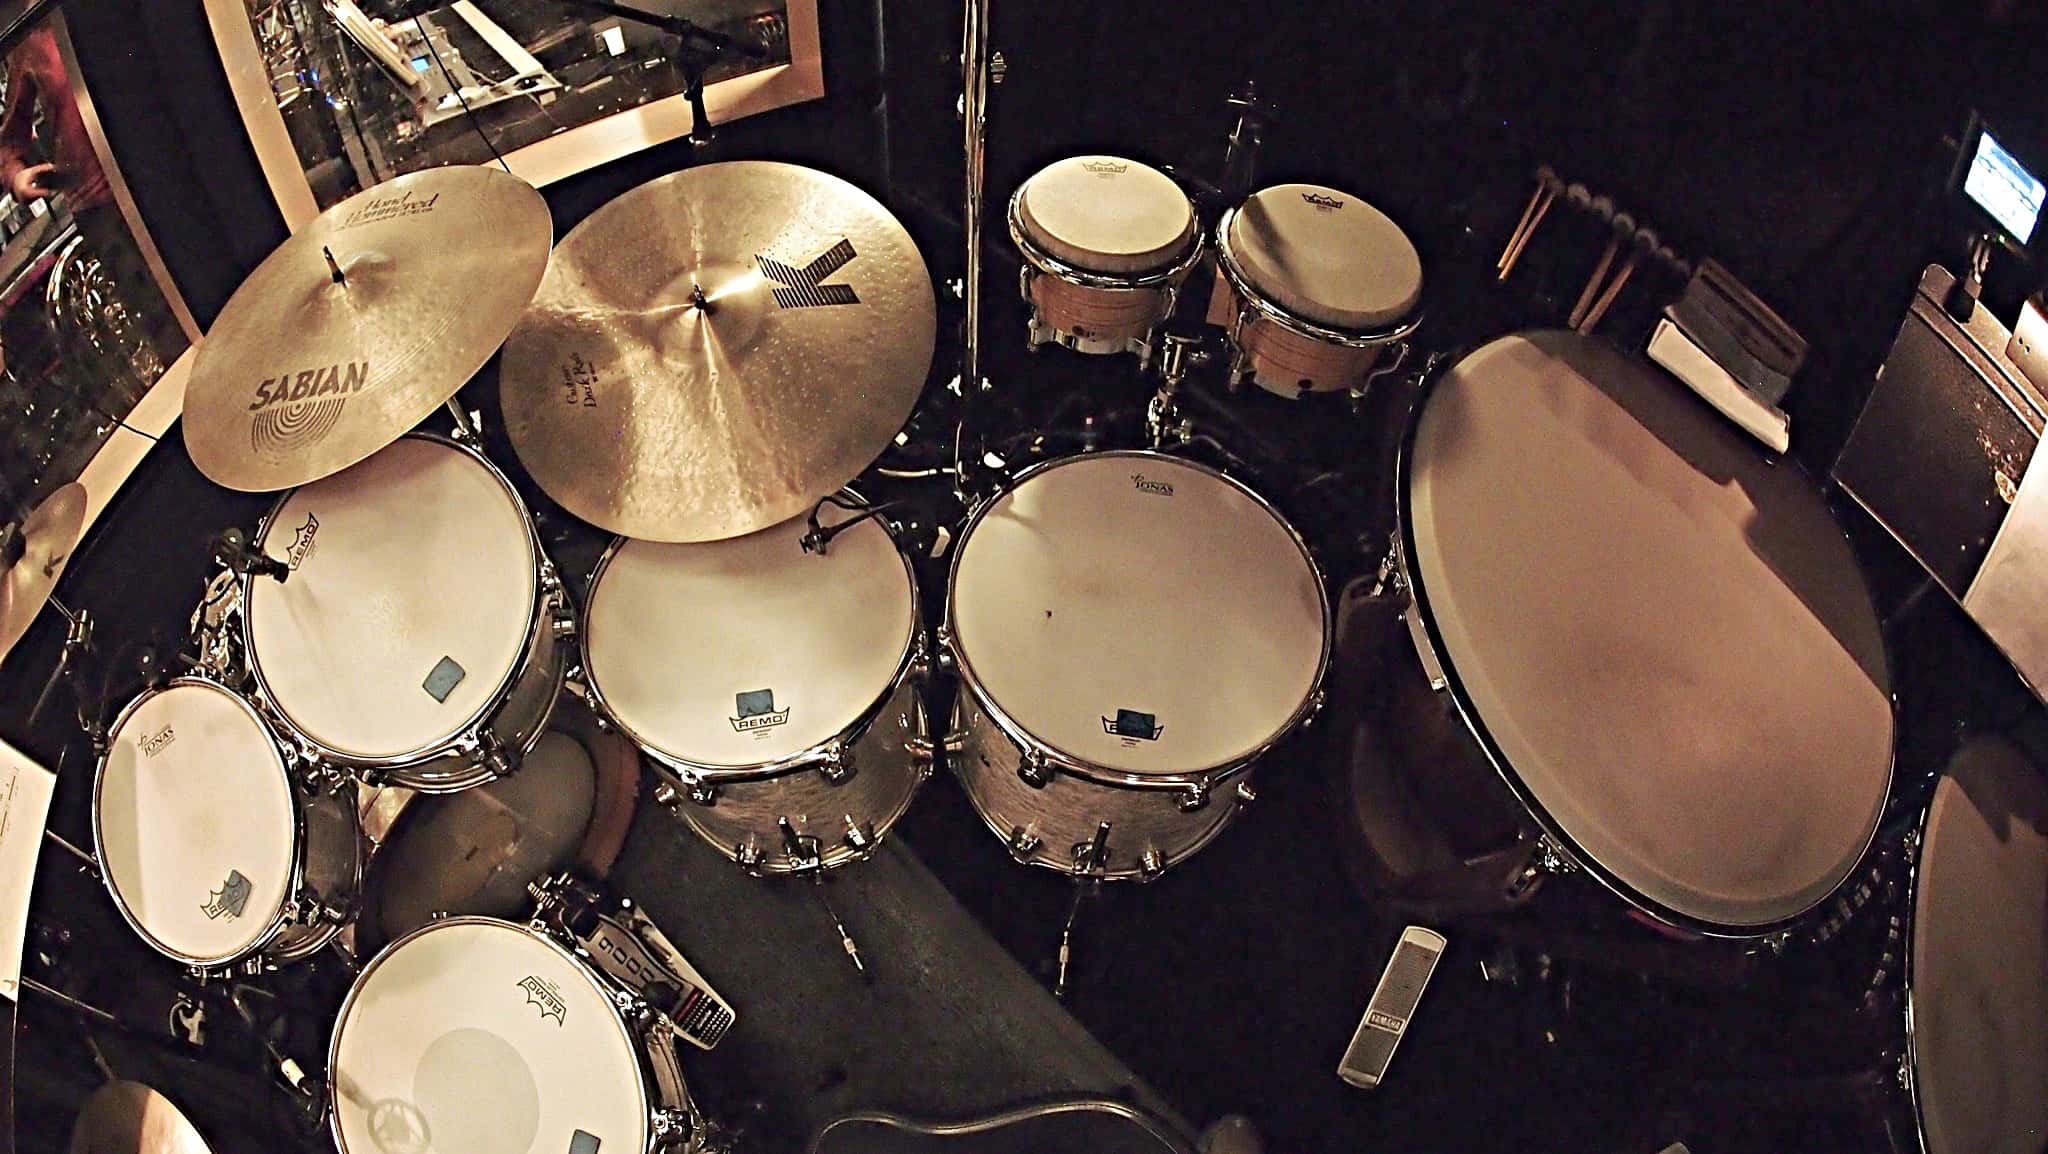 Aaron Nix's setup for the National Tour of Love Never Dies at the Paramount Theatre in Seattle, Washington.